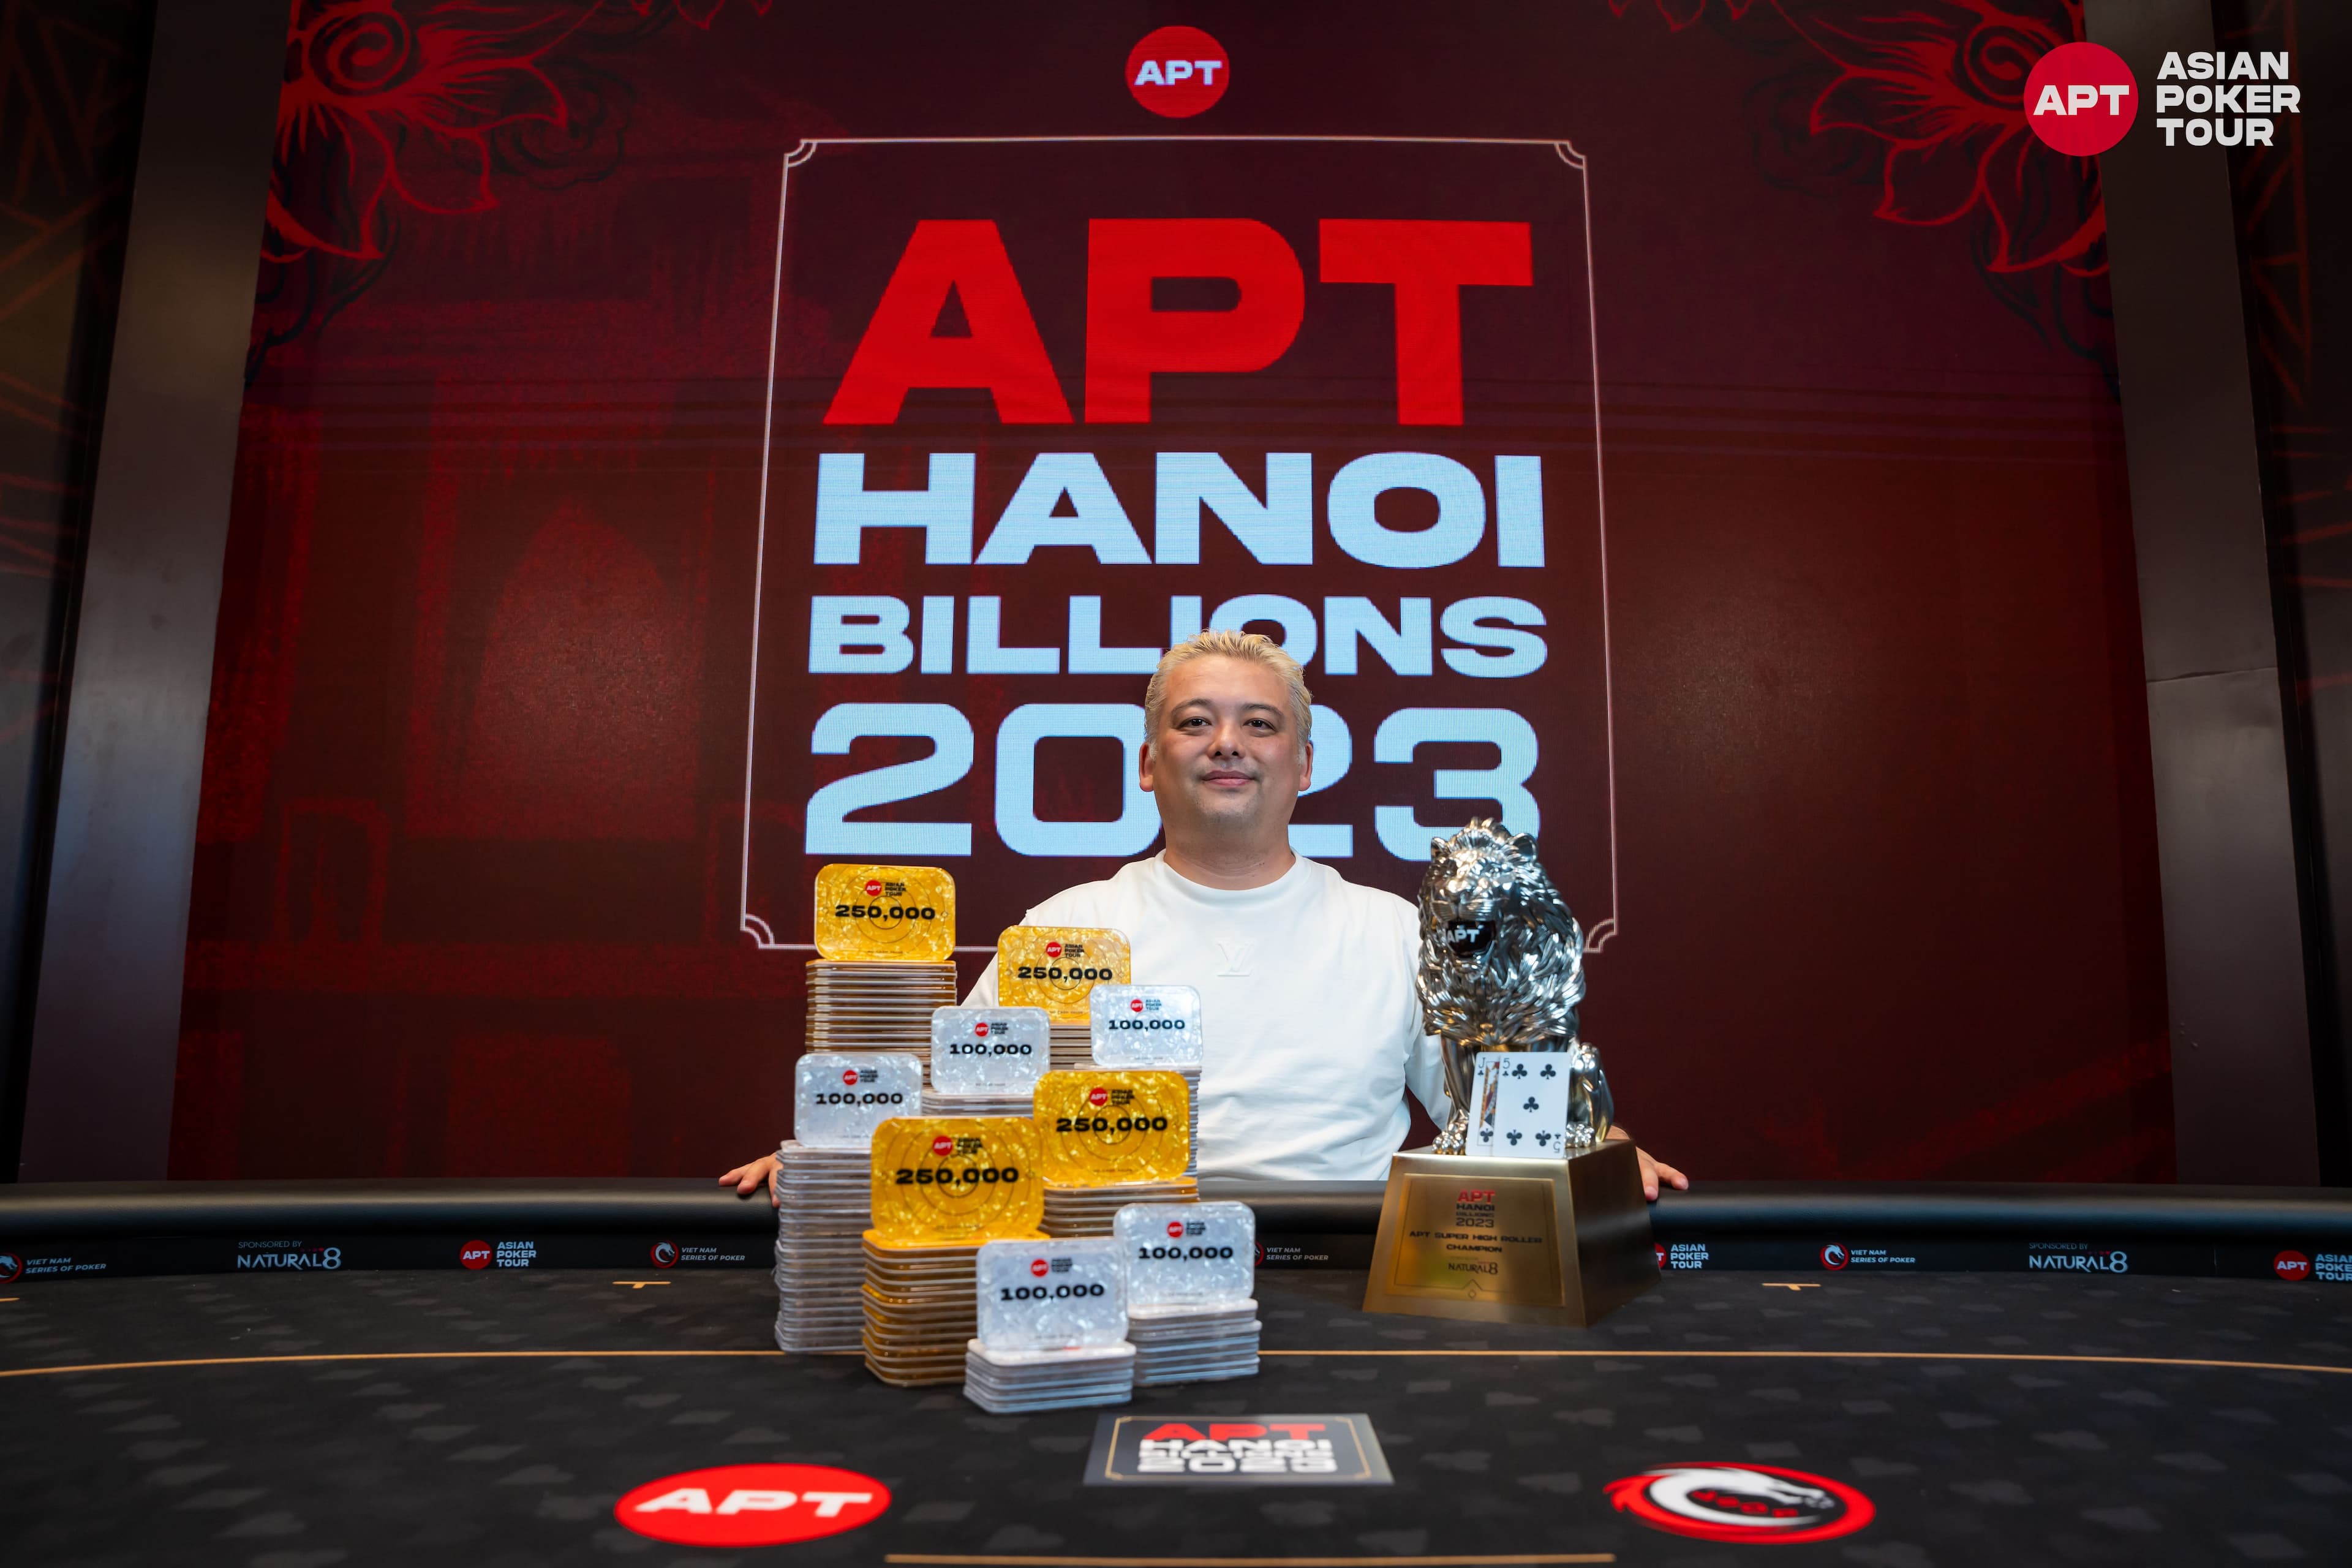 Japan's Nozomu Shimizu Claims Gold in Largest-Ever APT Super High Roller, Singapore's Jereld Sam Wins Record-Breaking Mystery Bounty Hunter